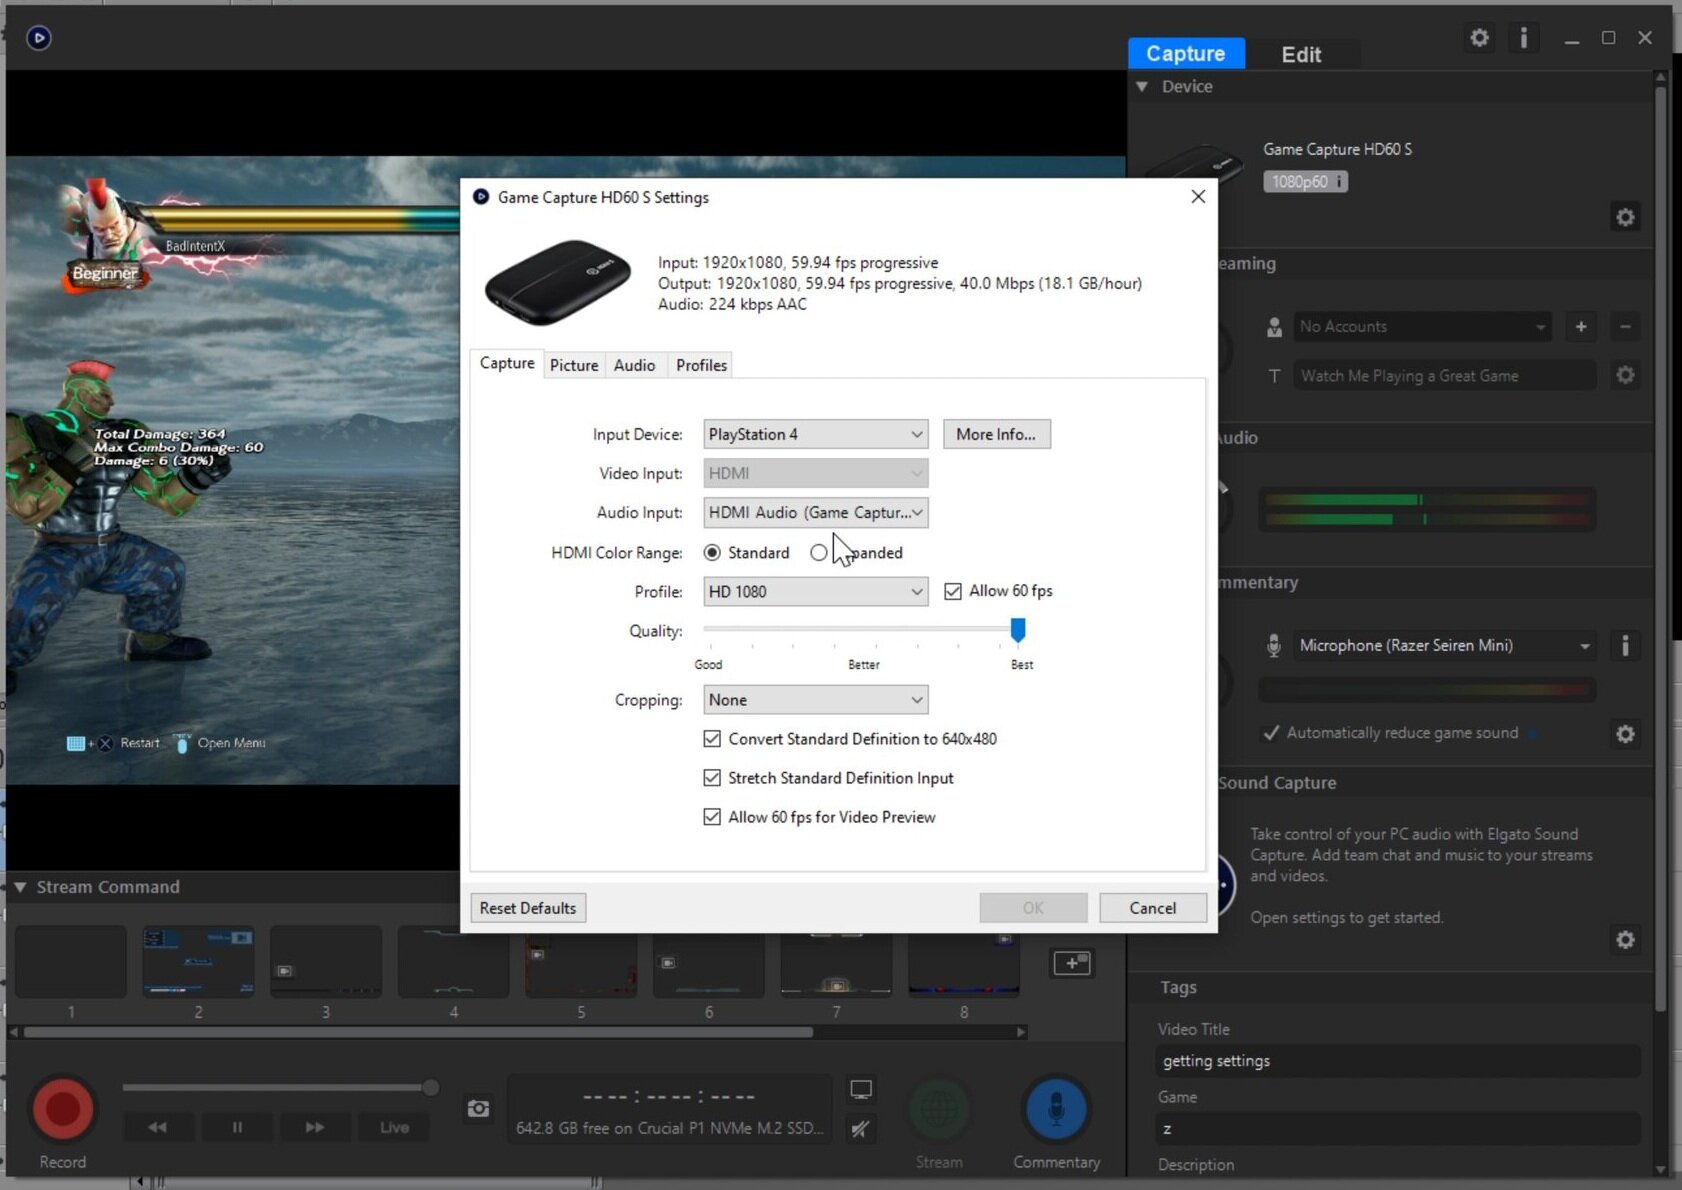 How to set up and Install Elgato HD60 S Capture Card — Stream Tech Reviews  by BadIntent